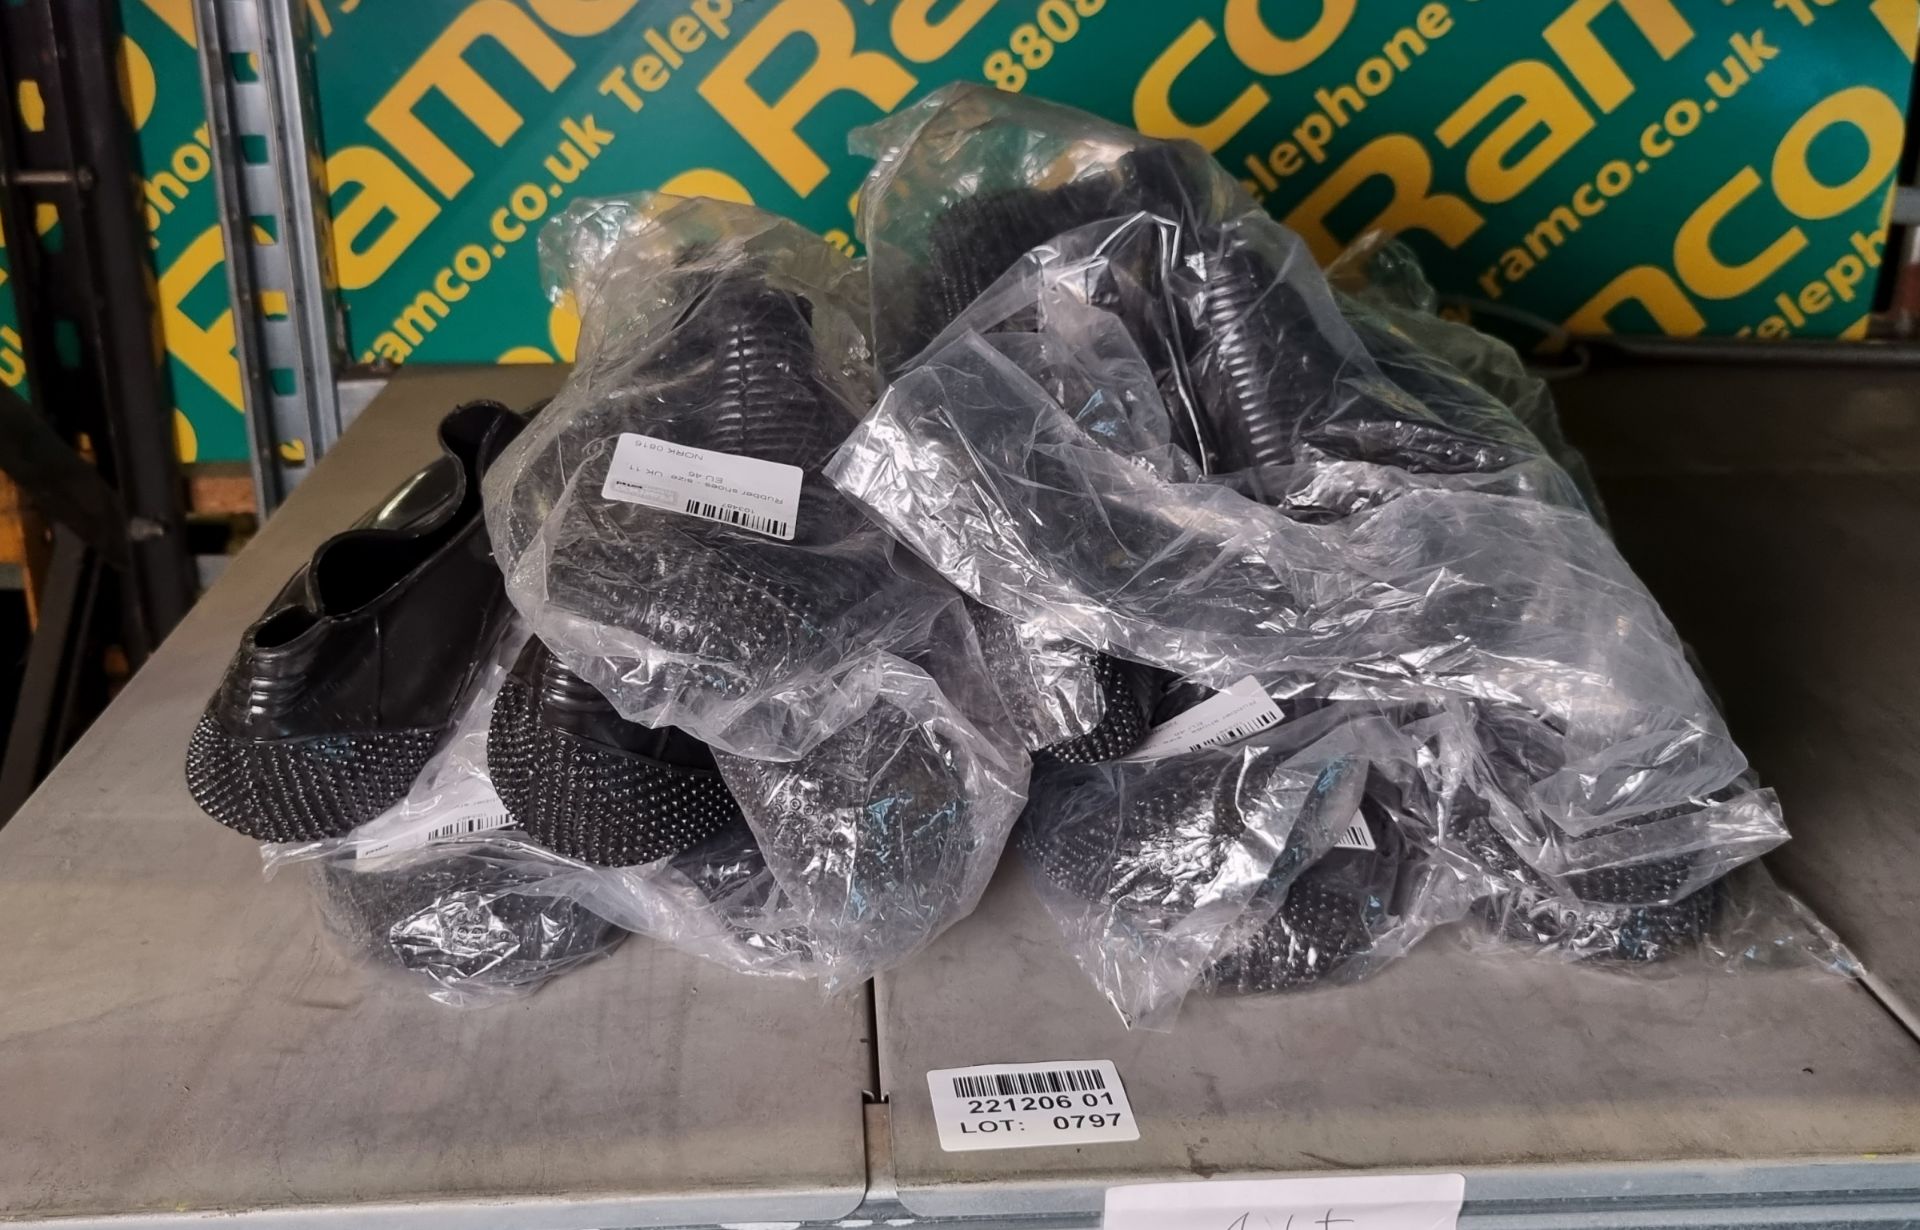 6x Pairs of Rubber shoes - size: UK 11, EU 46